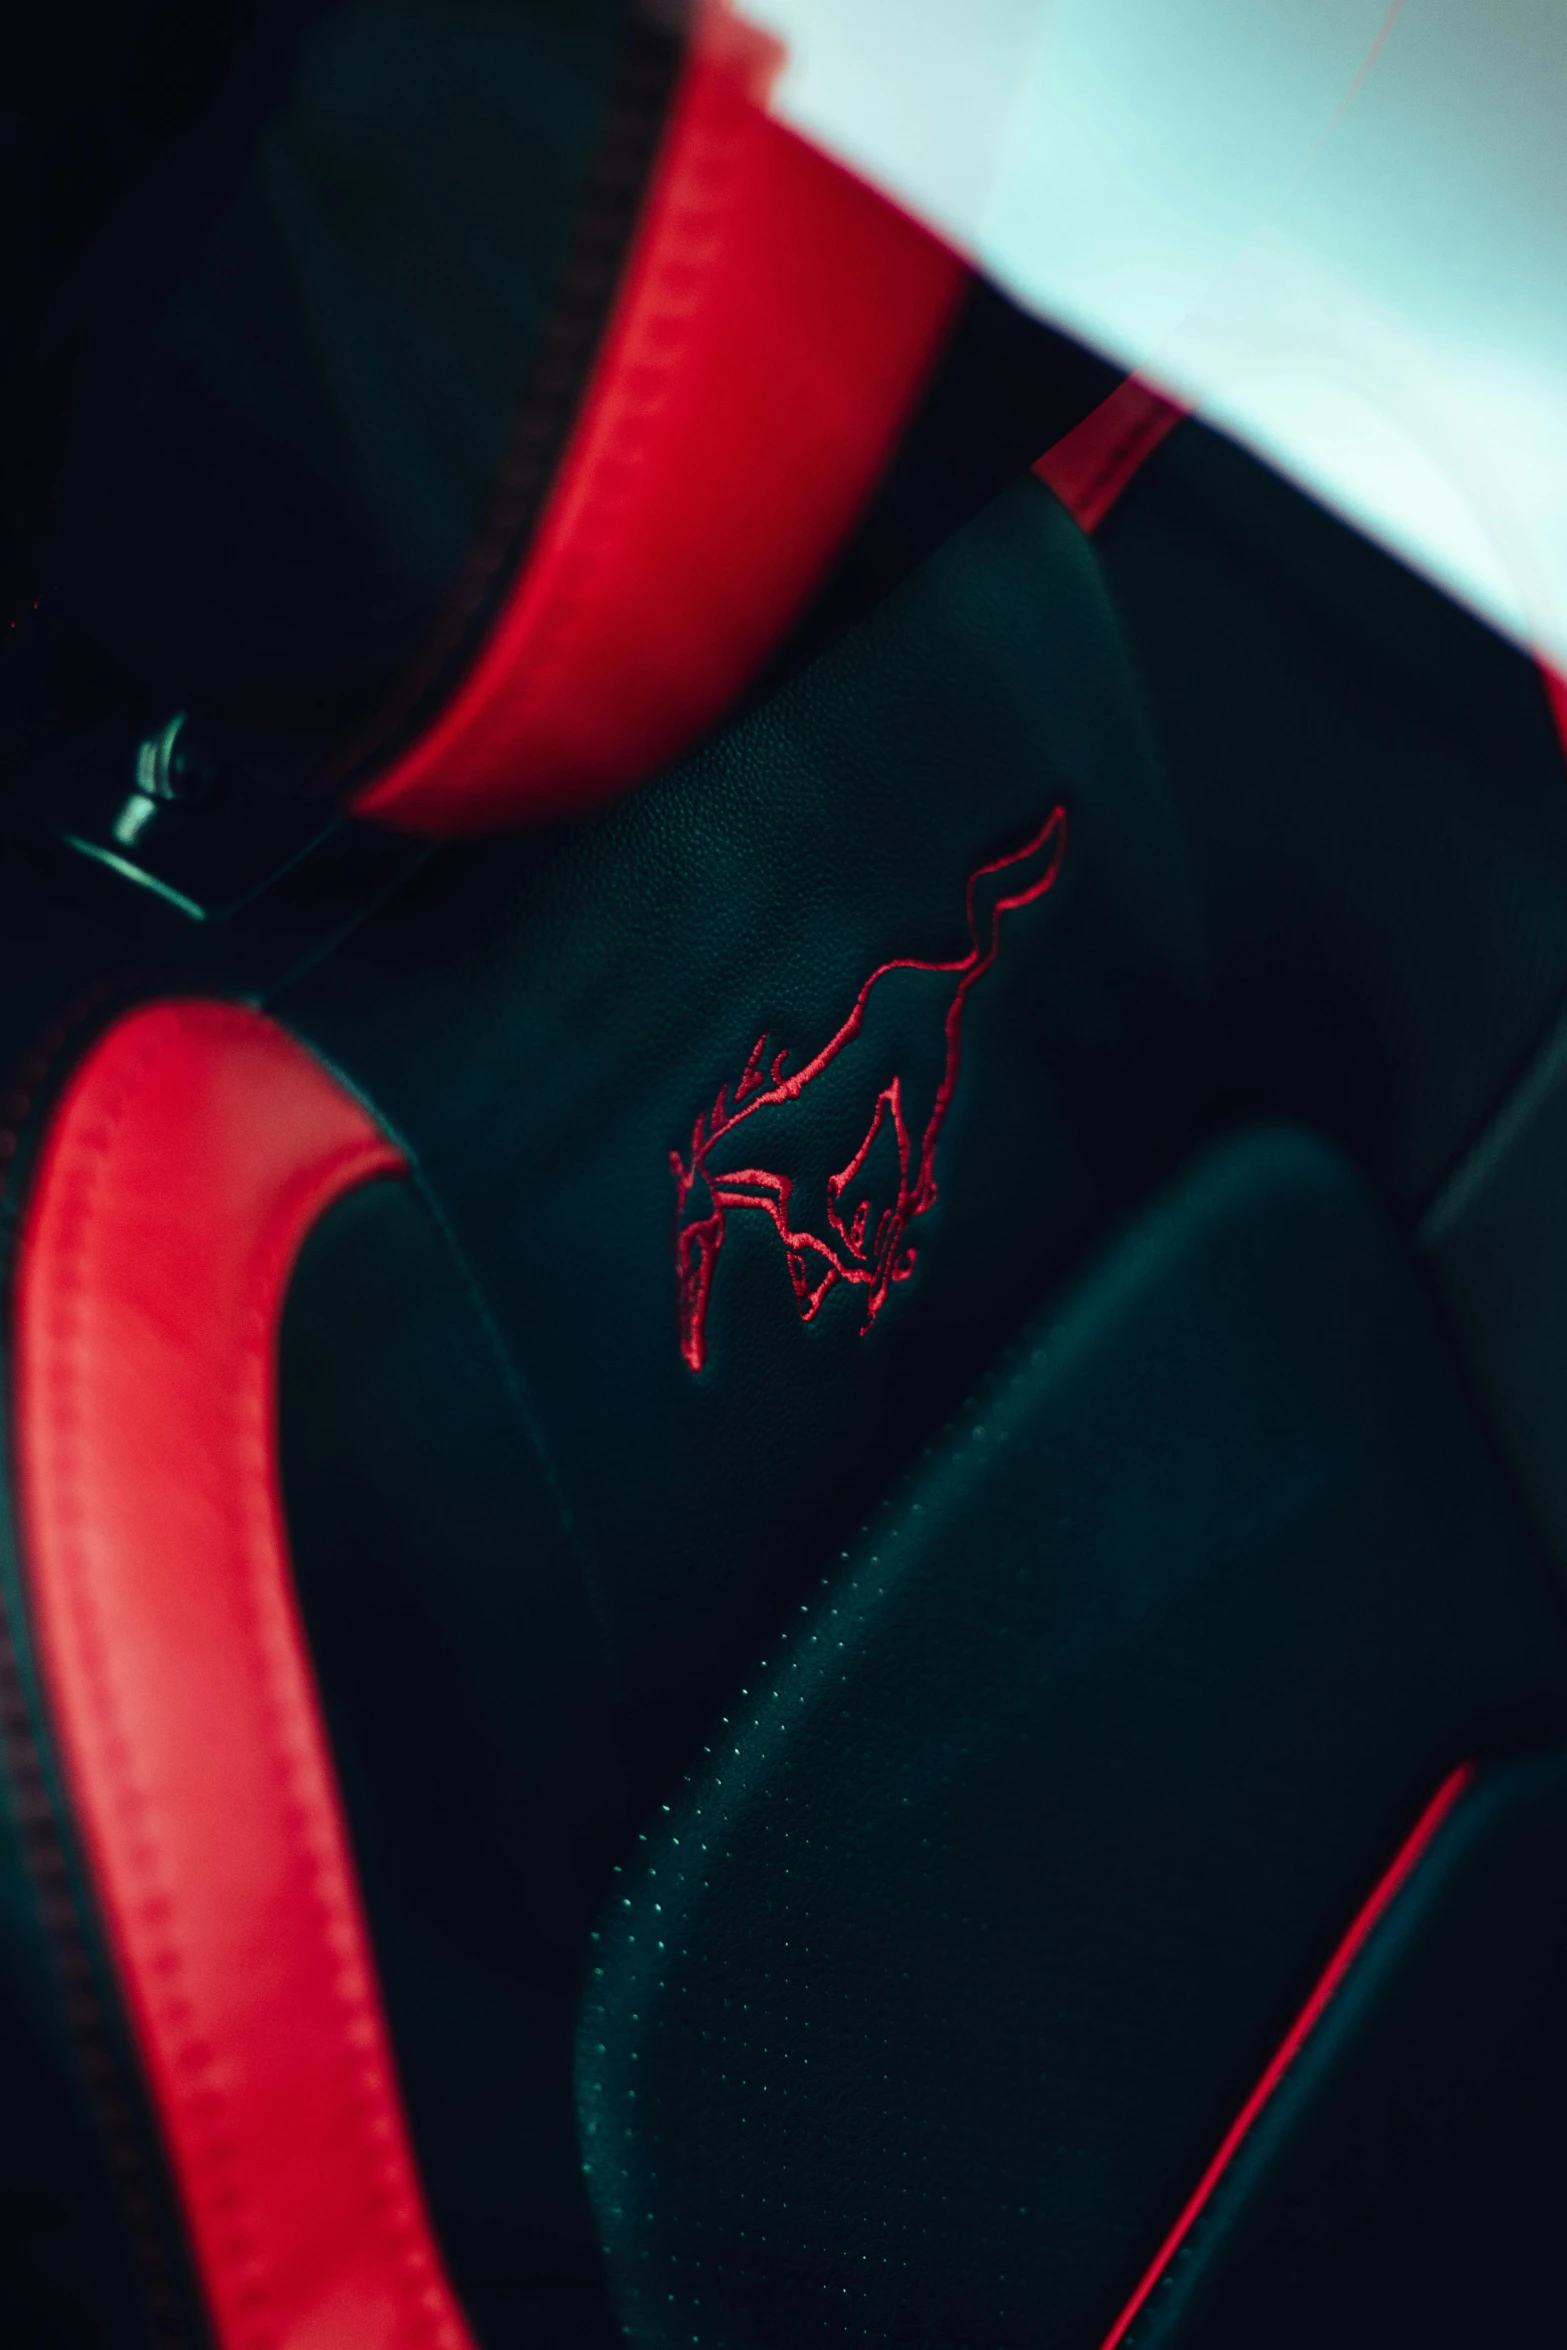 a red mustang emblem on the seat of a car